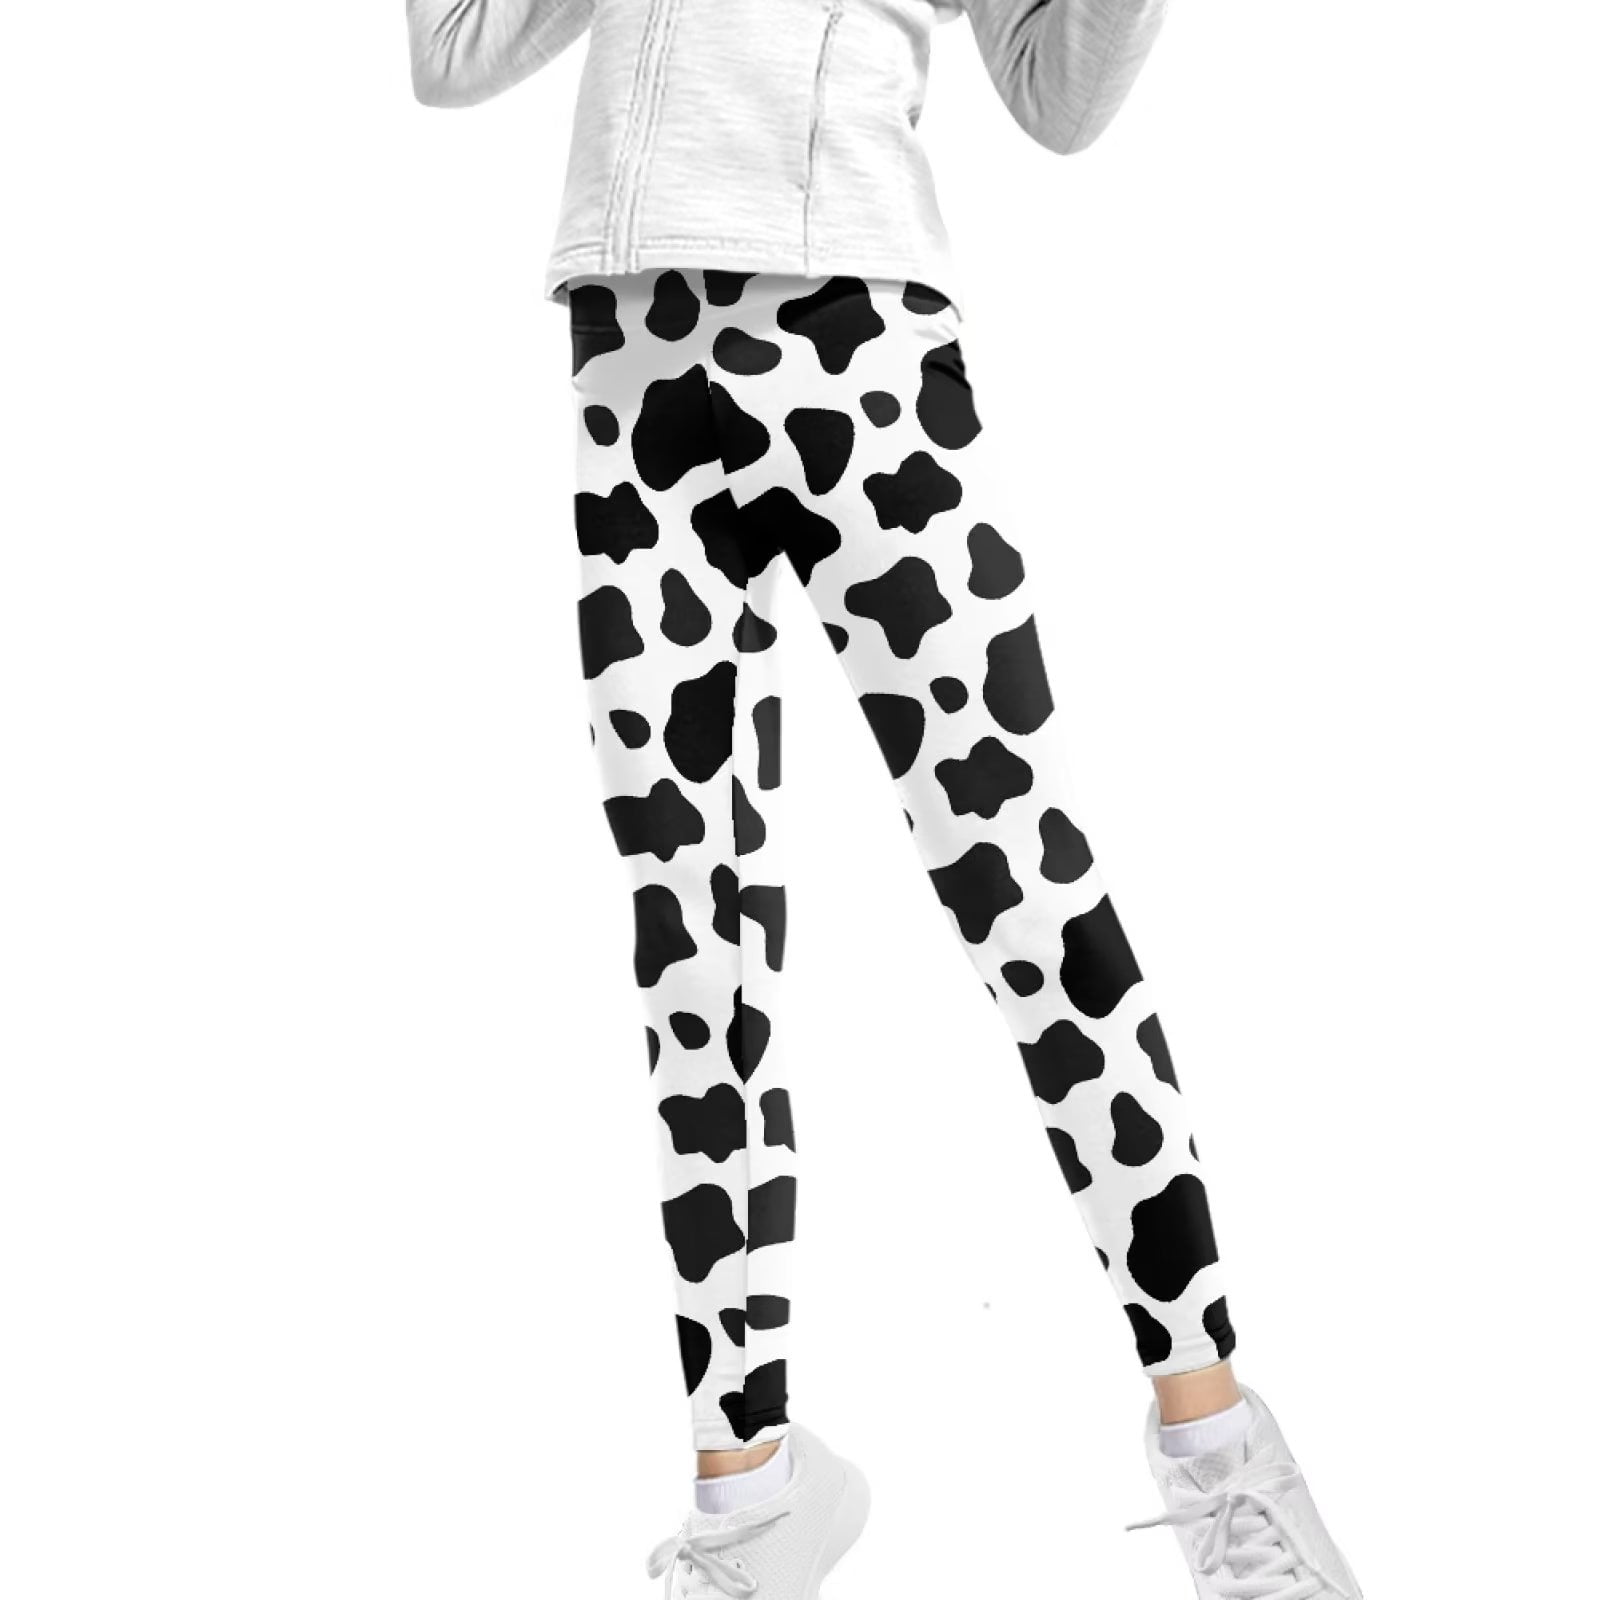 FKELYI Cow Print Cute Kids Leggings Size 12-13 Years Comfortable